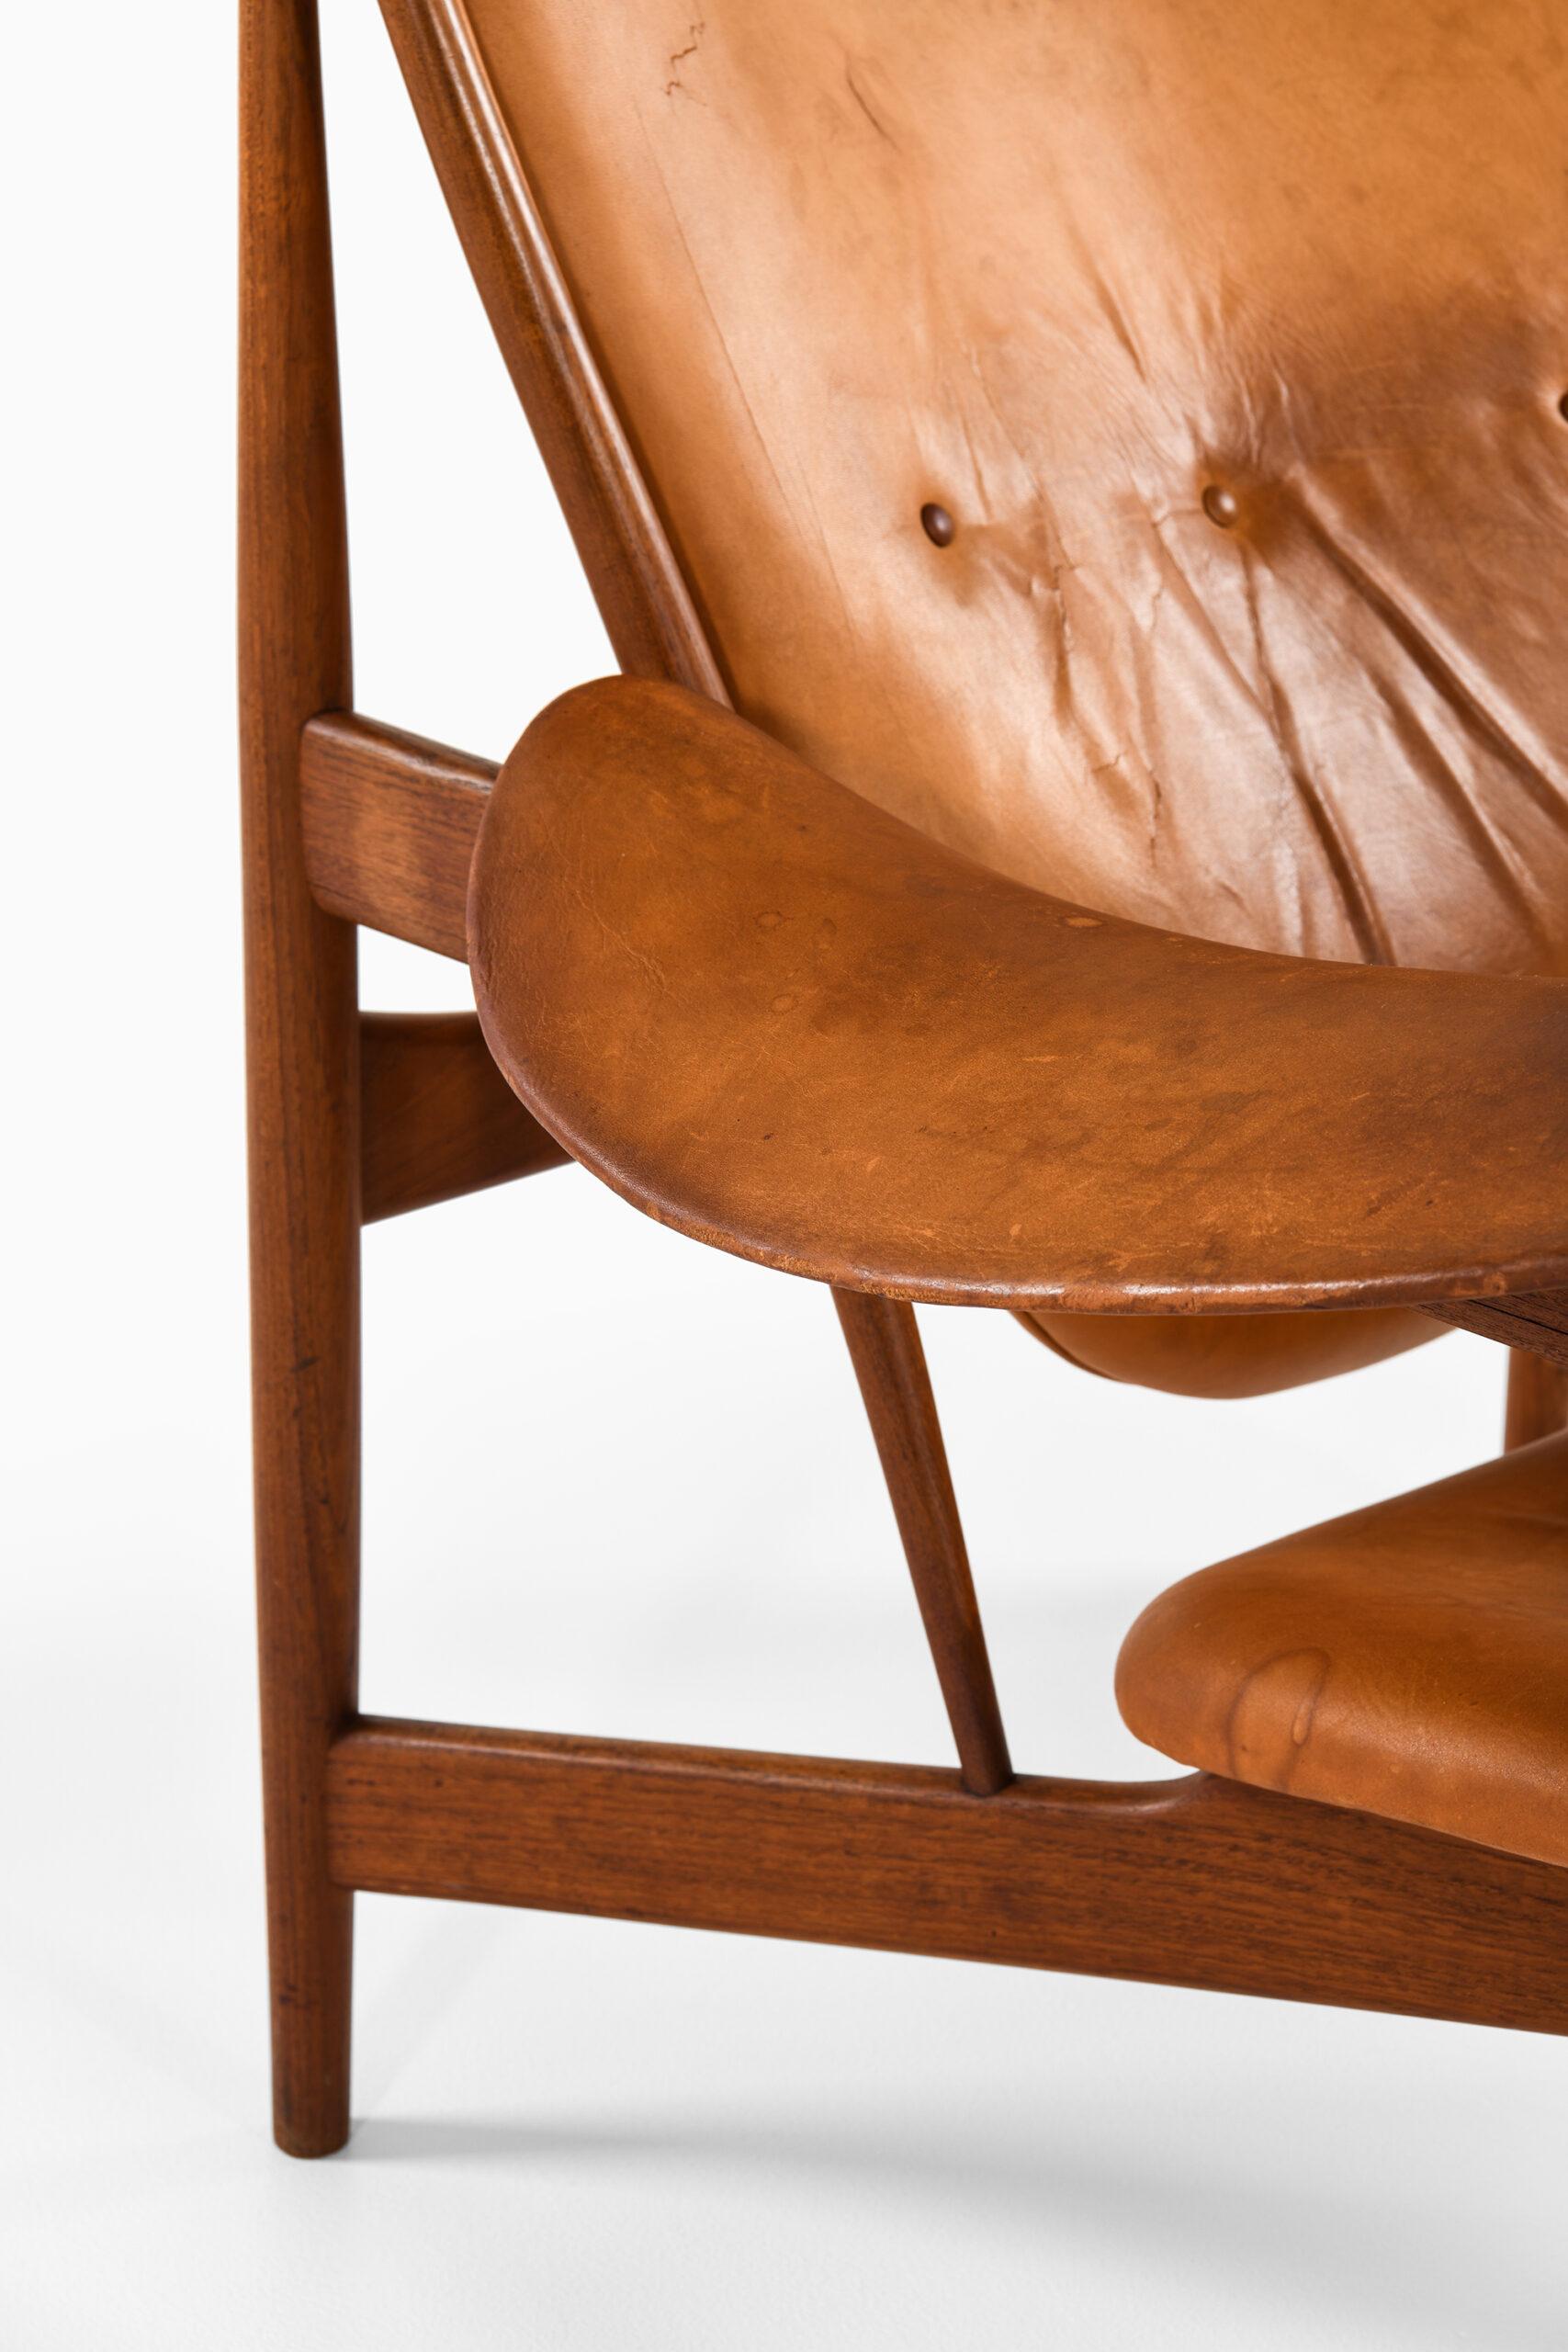 Leather Finn Juhl Chieftain Easy Chair Produced by Cabinetmaker Niels Vodder